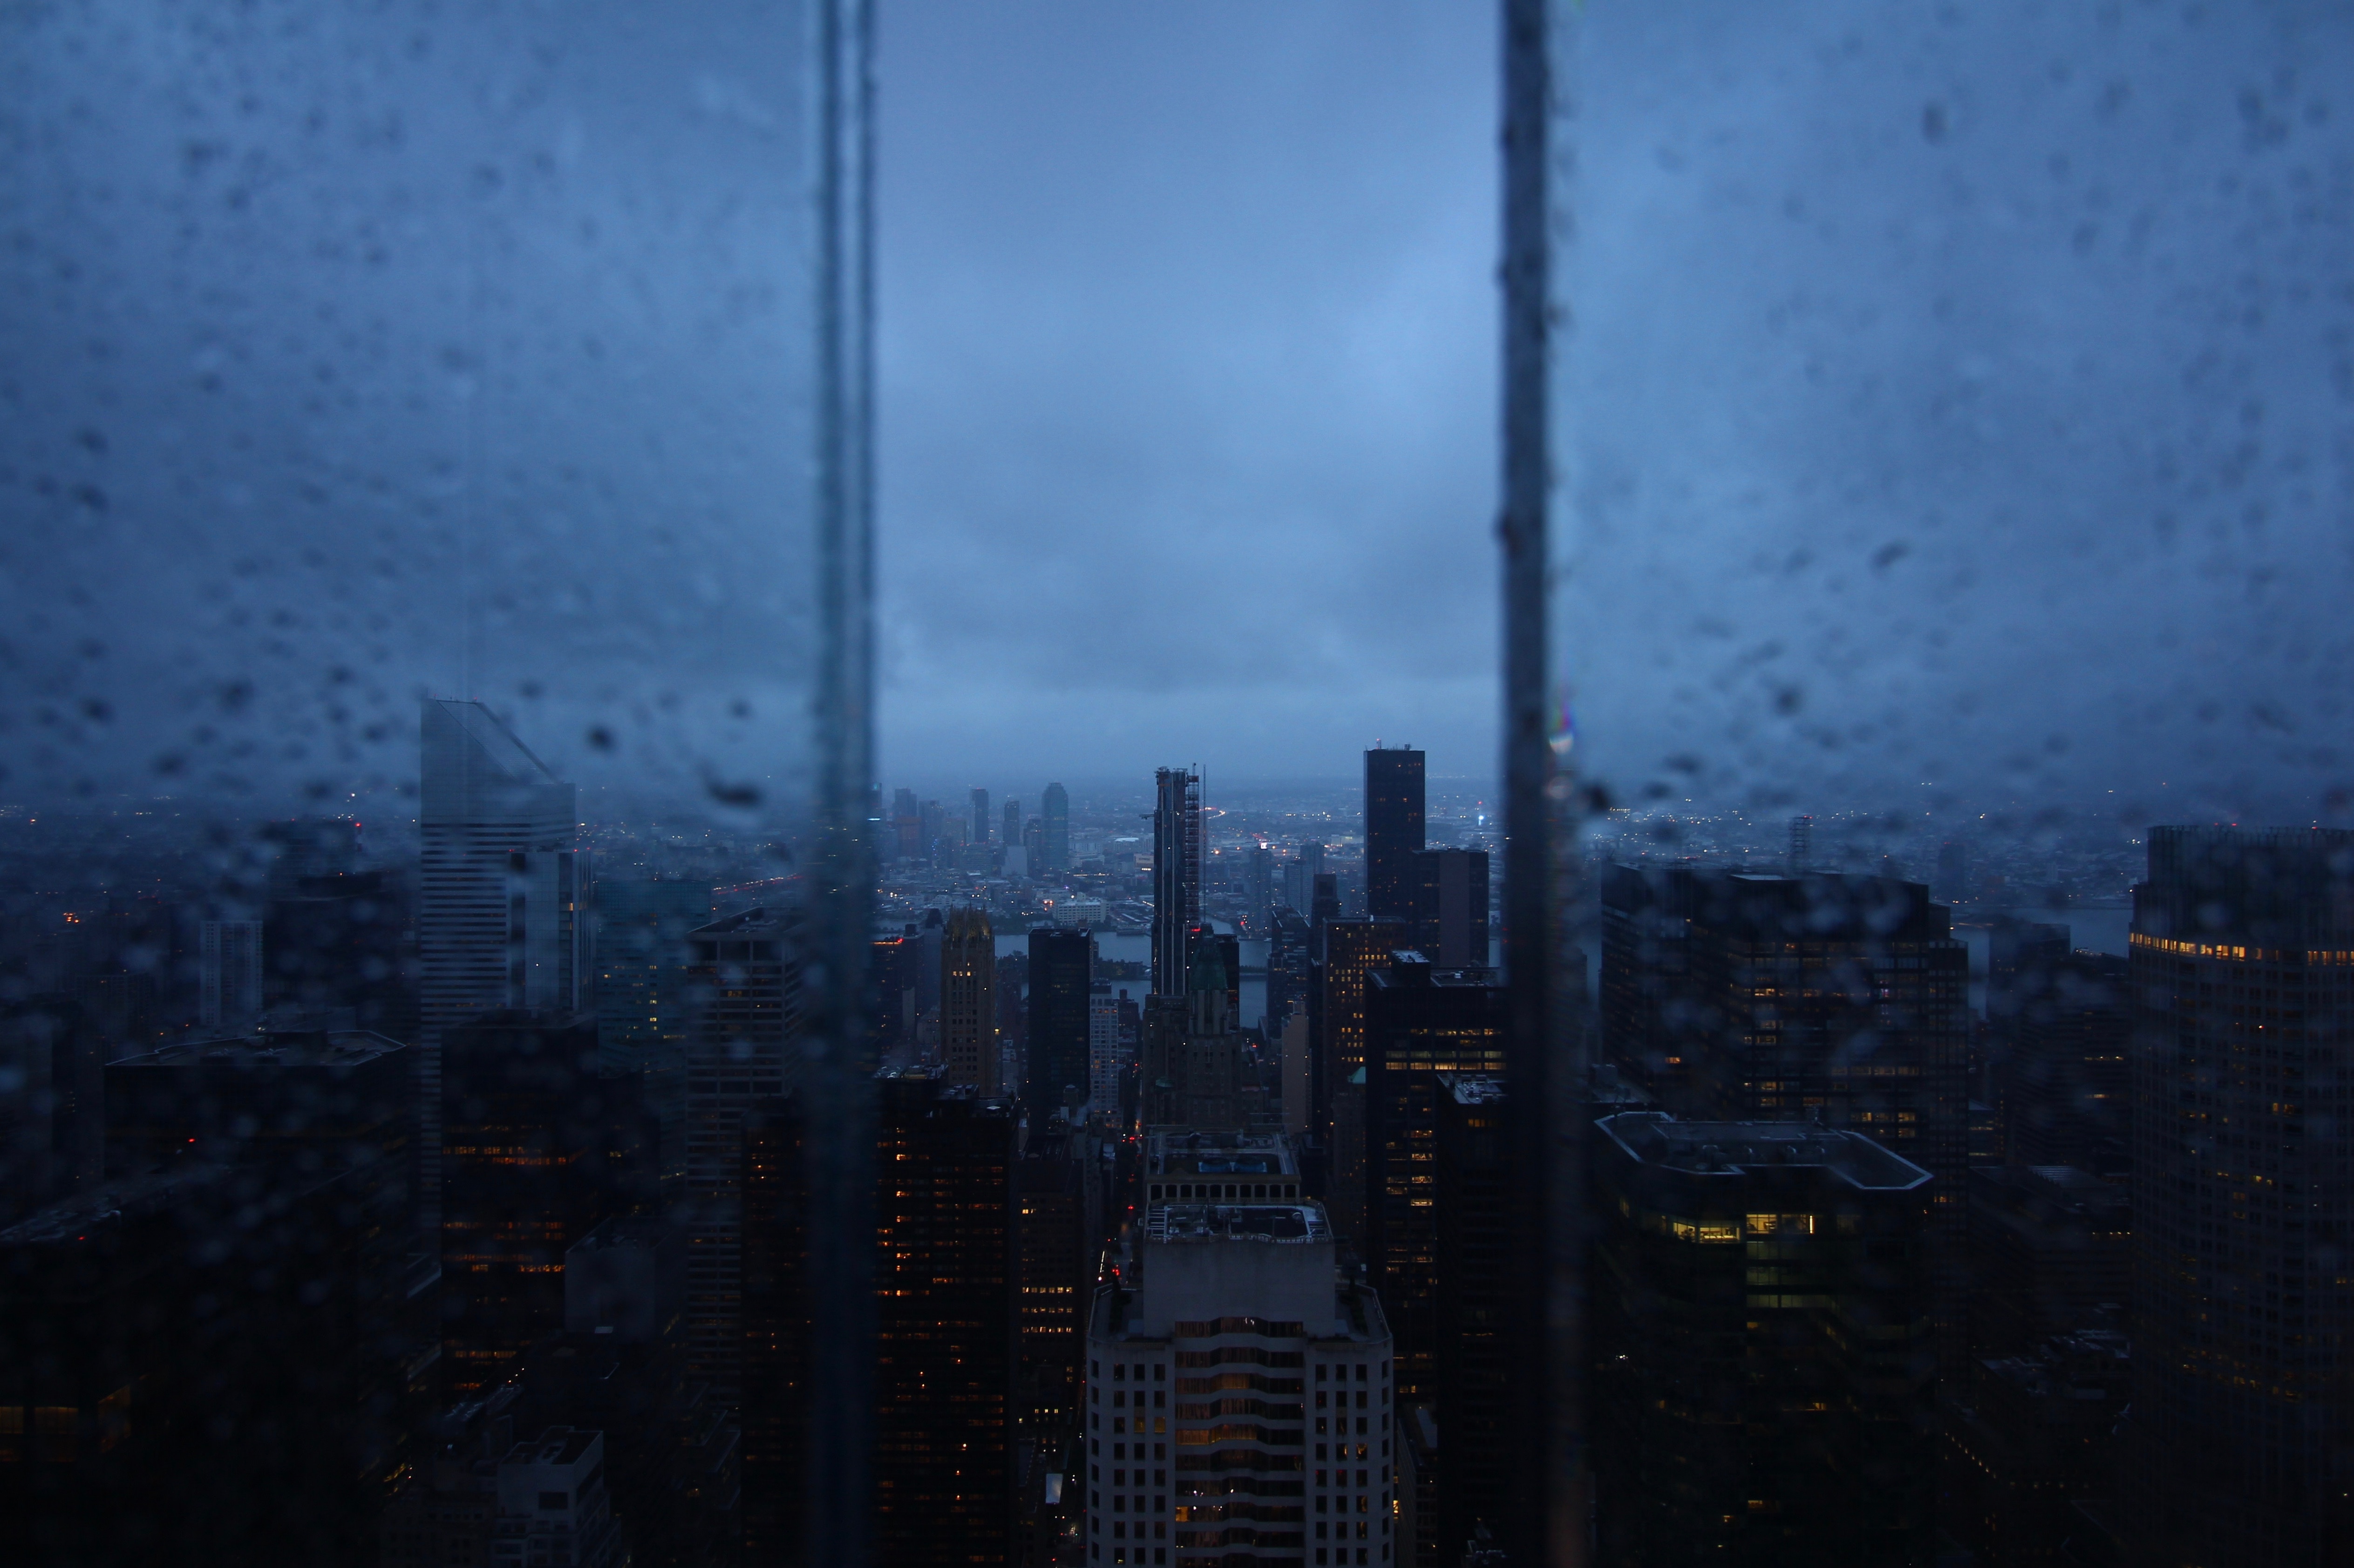 rain, skyscrapers, cities, view from above, night city, window